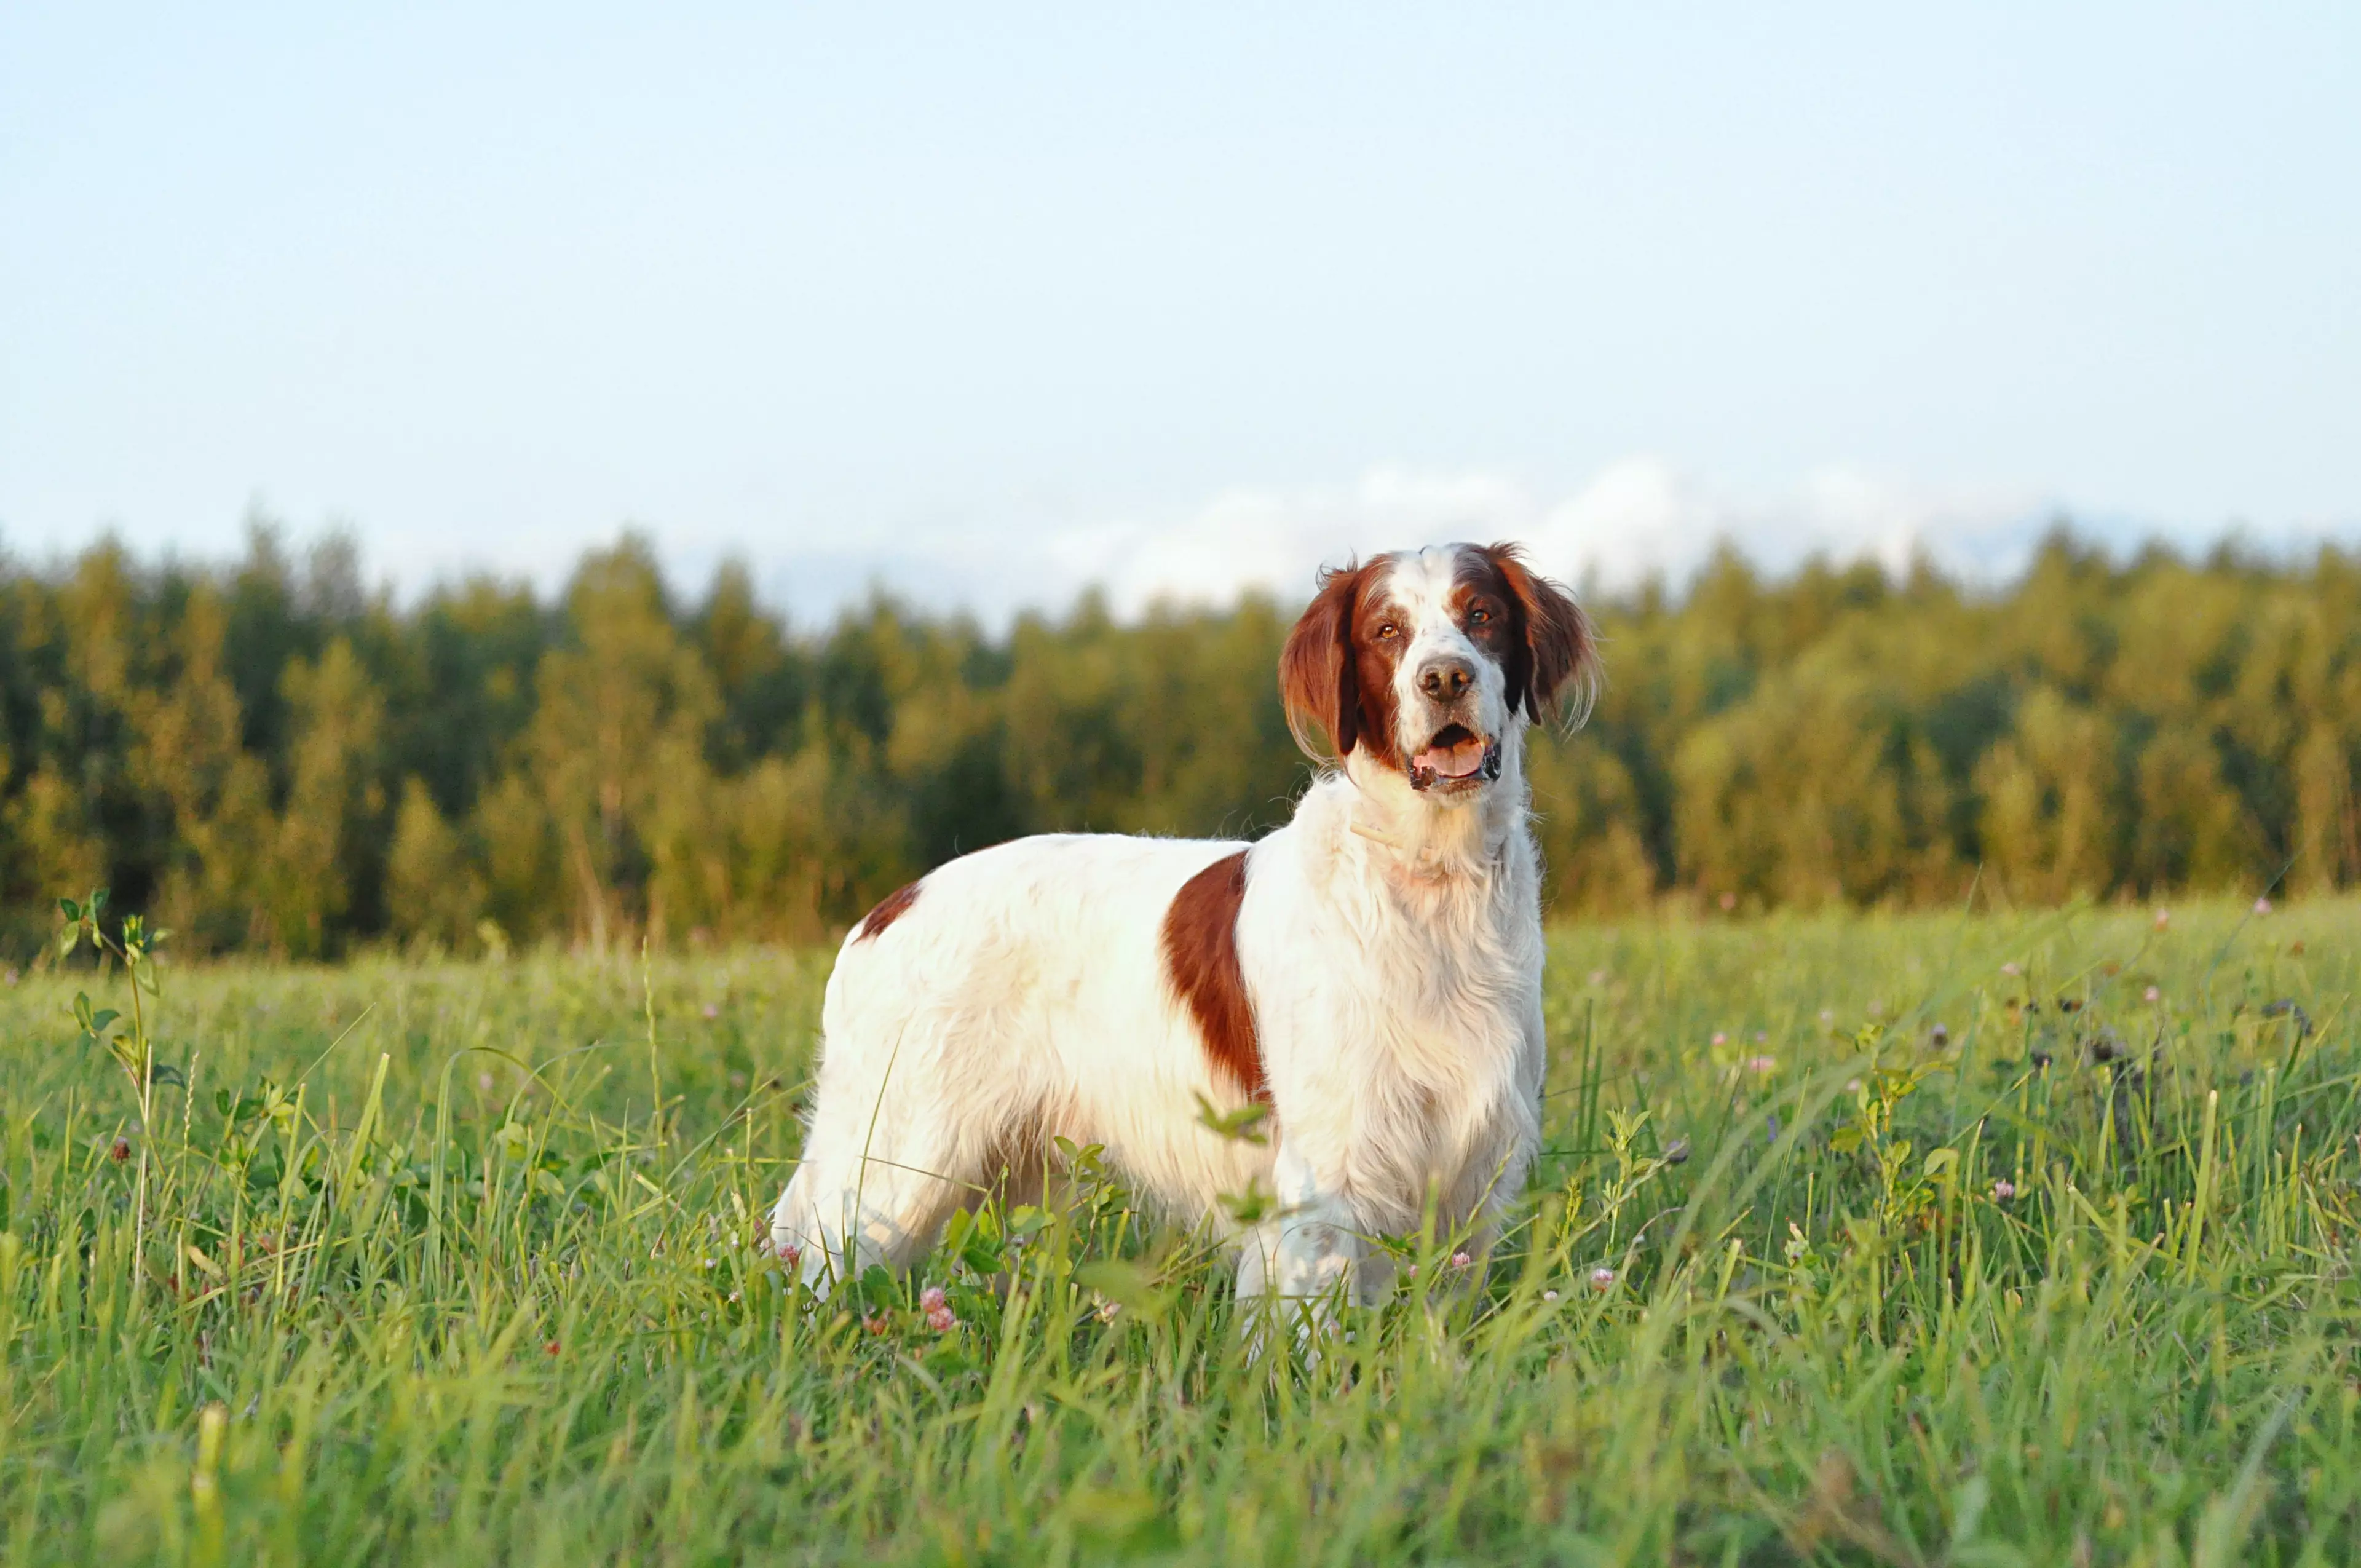 Registrations for the Irish Red and White Setter are now up by 113 per cent (